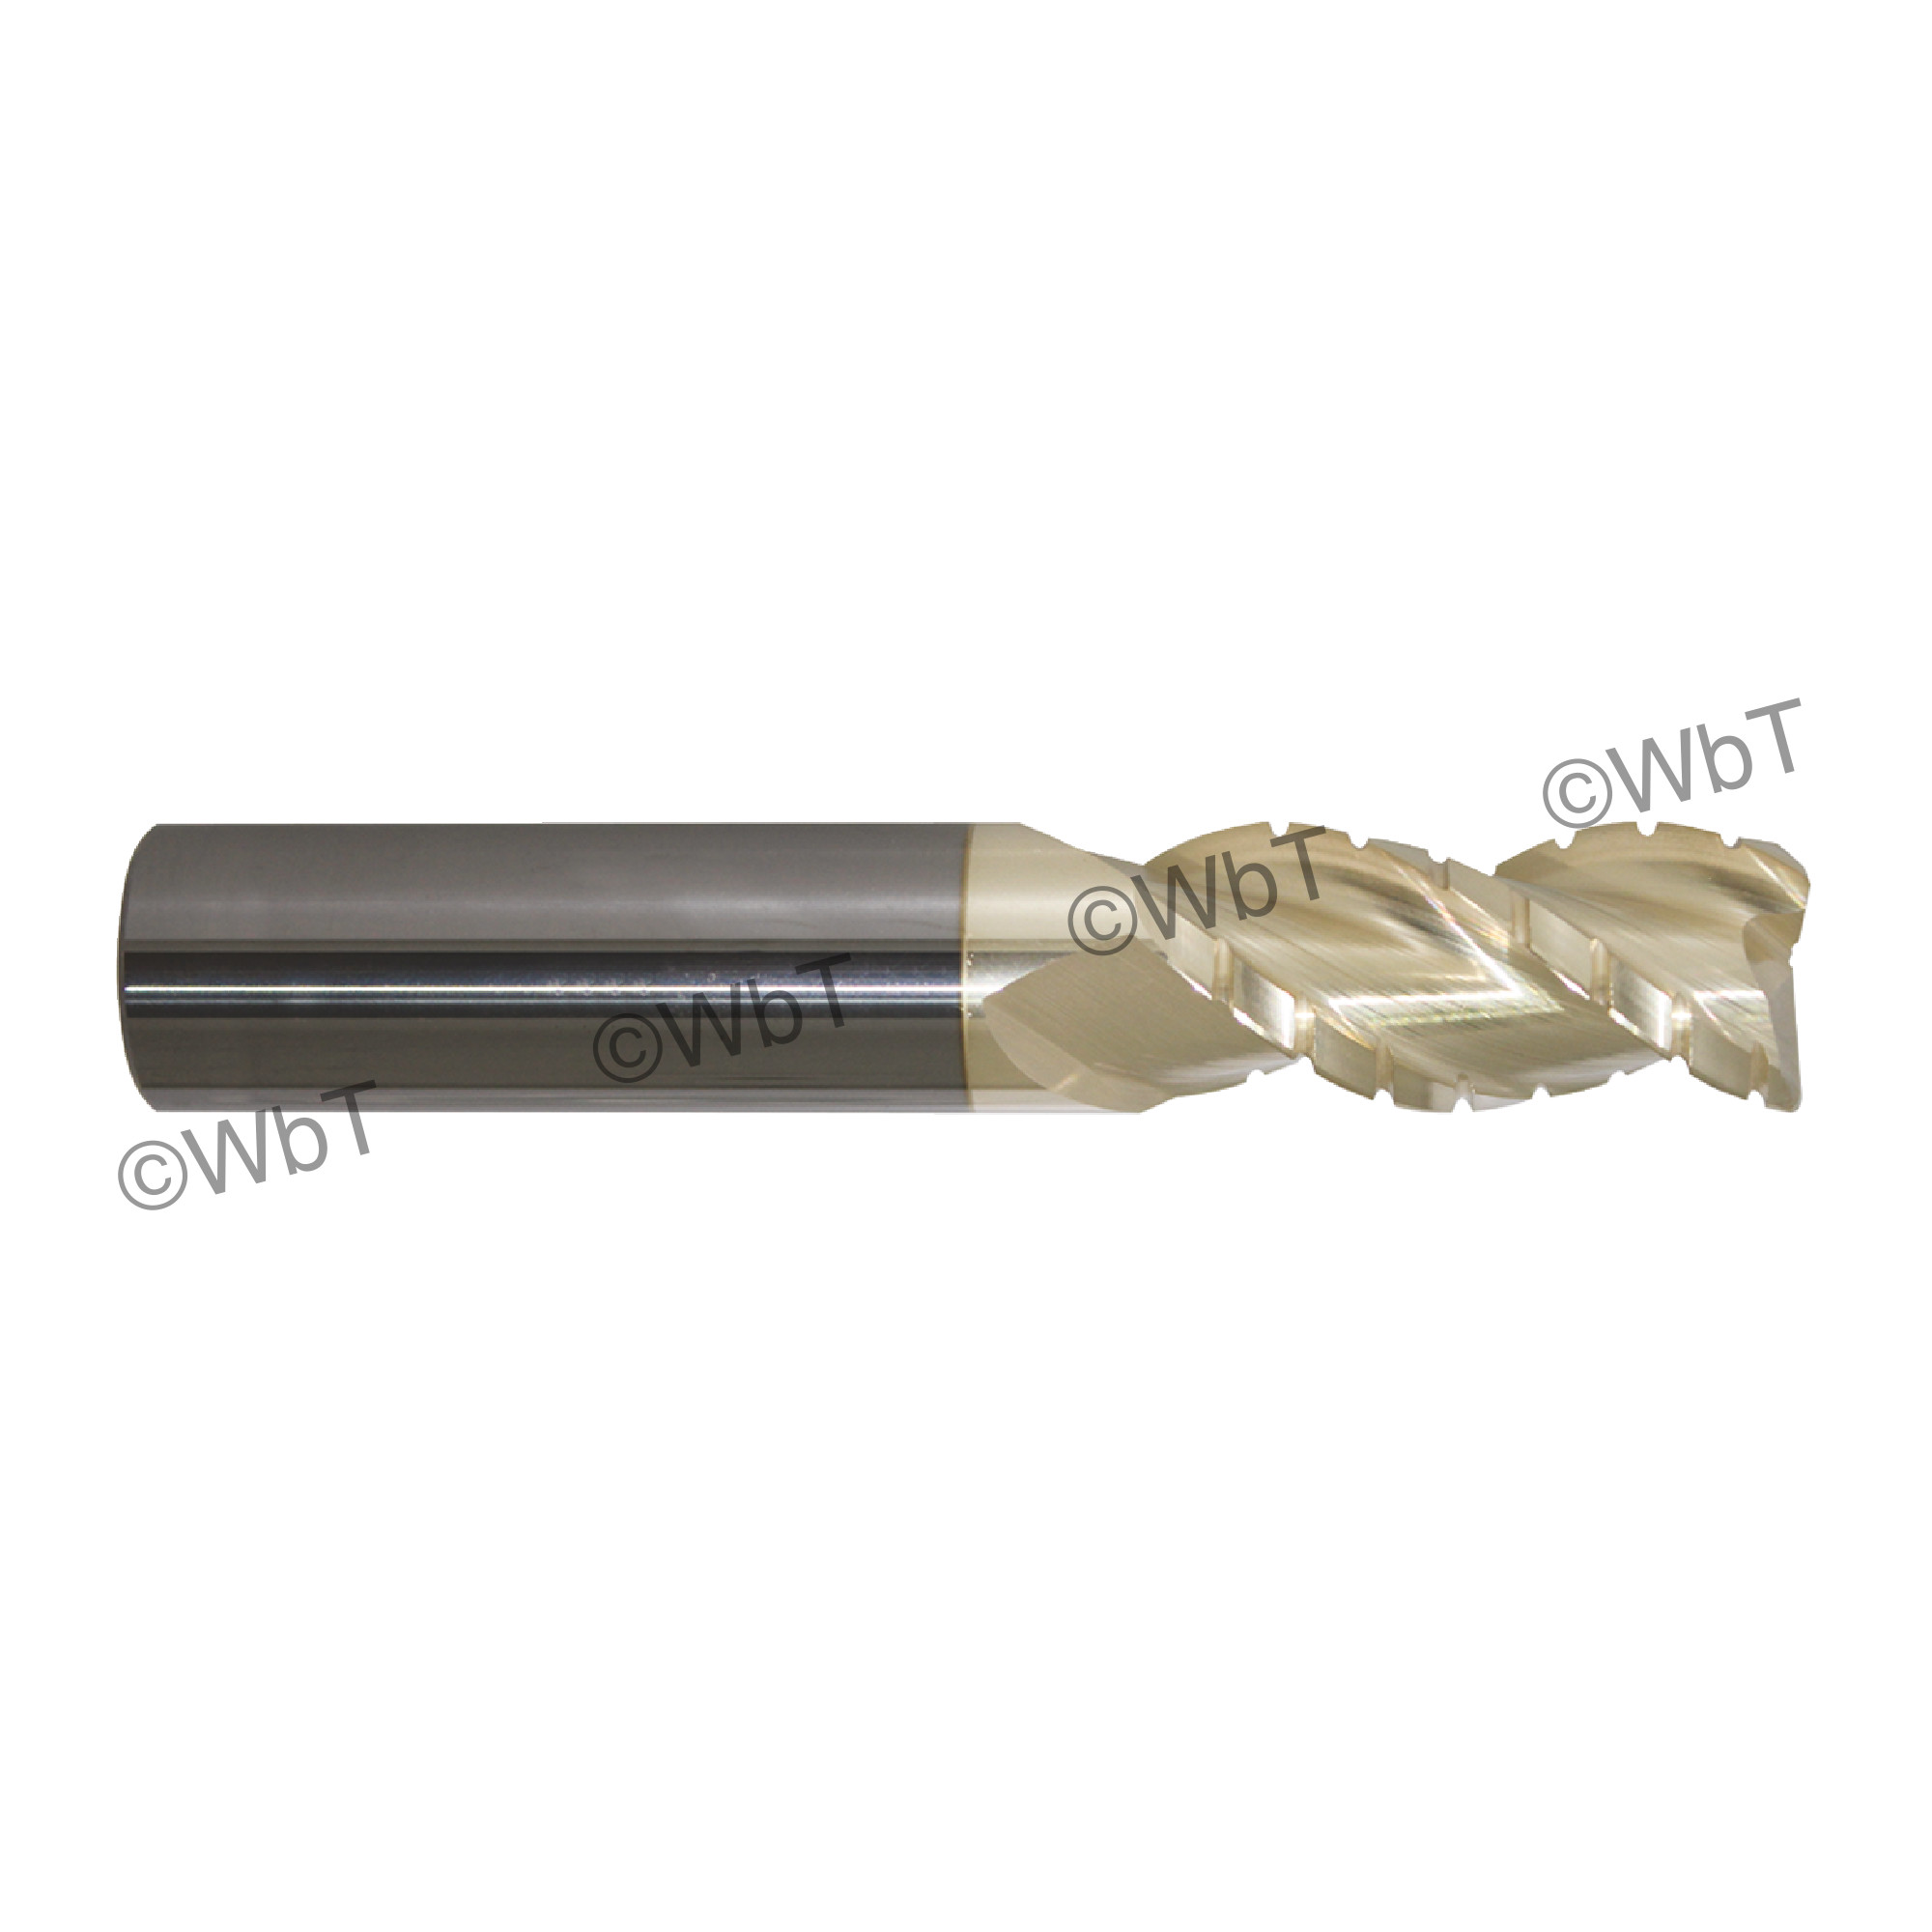 Promax Solid Carbide 3 Flute Roughing-Finishing Corner Radius End Mill 3/8" 119-02426 Series 119